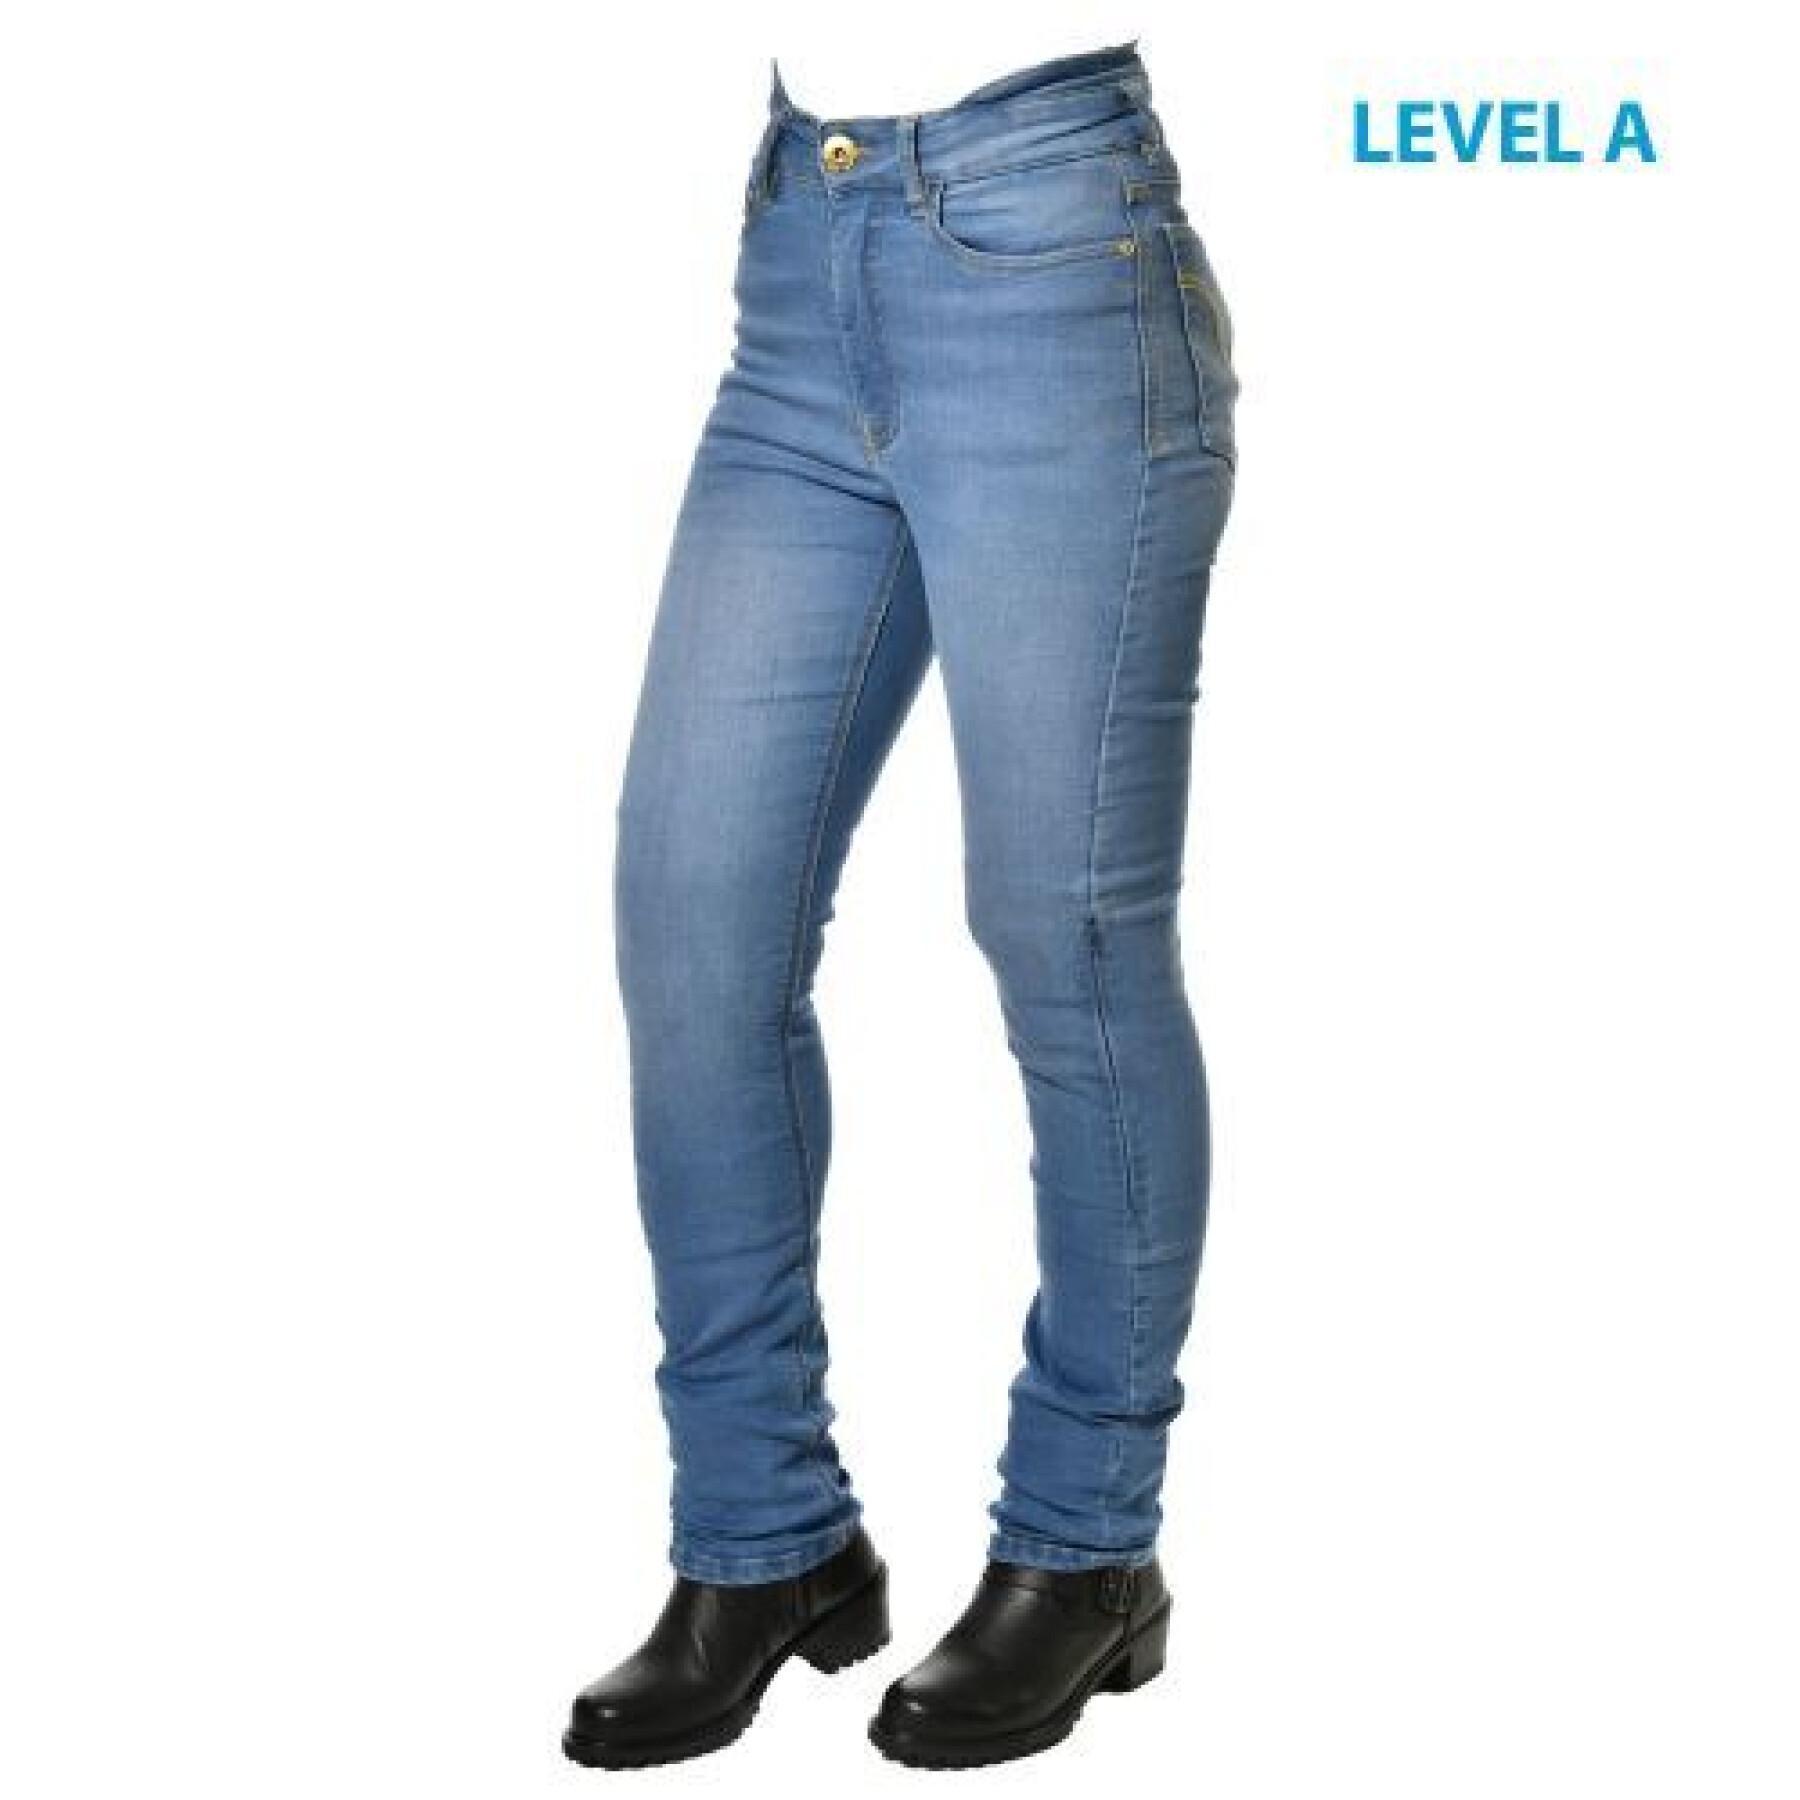 Jeans motorcycle woman Overlap Erin Single Layer Homologated